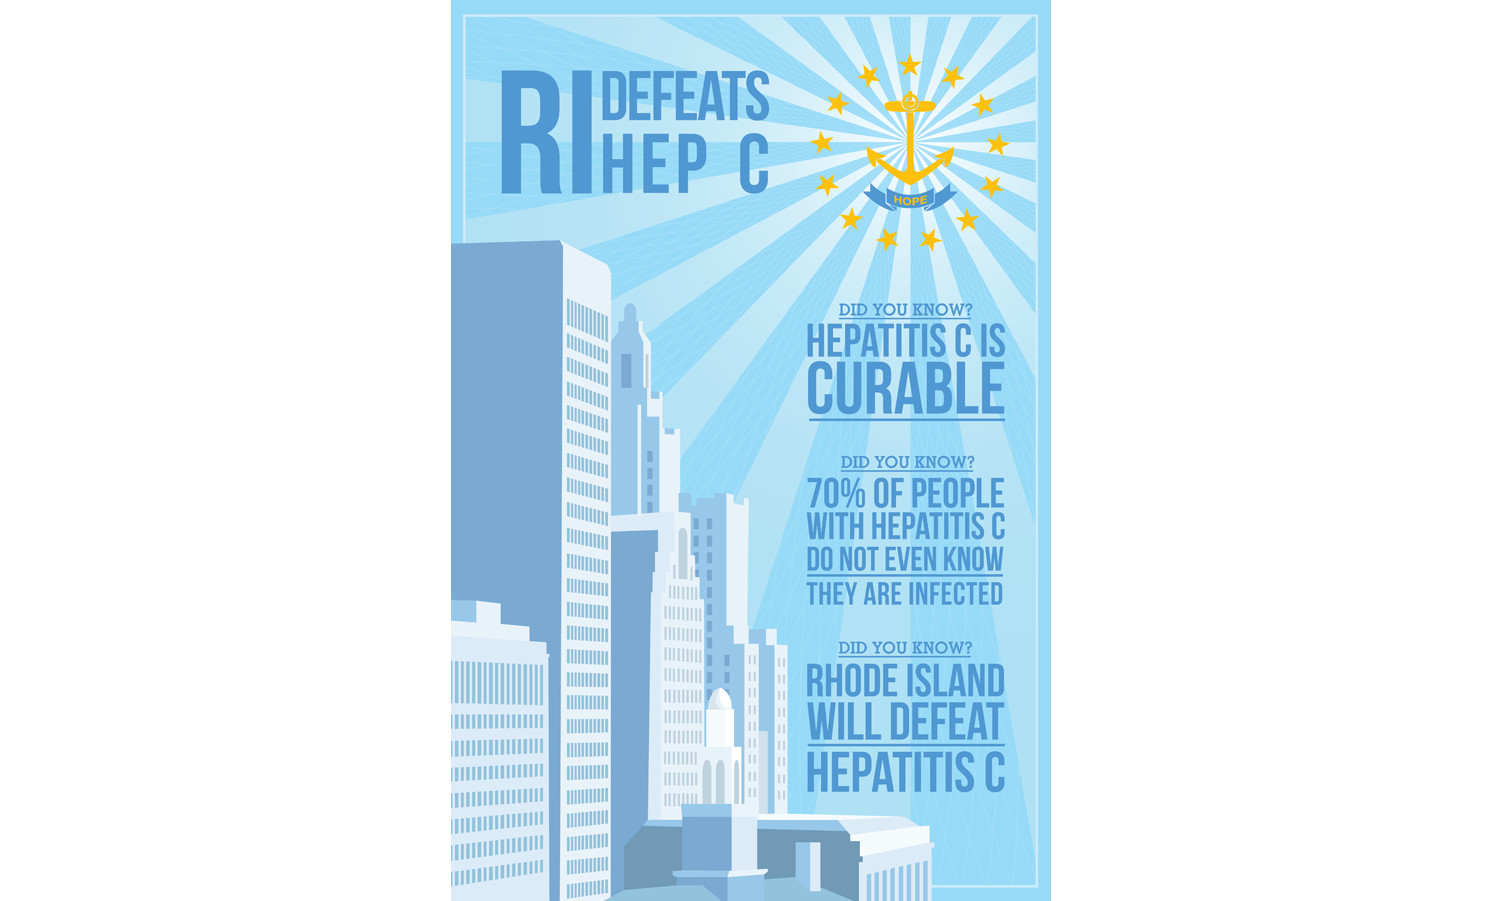 Poster design competition won by Hayward H. Gatch IV, promoting the RI Defeats Hep C initiative being led by Dr. Lynn Taylor